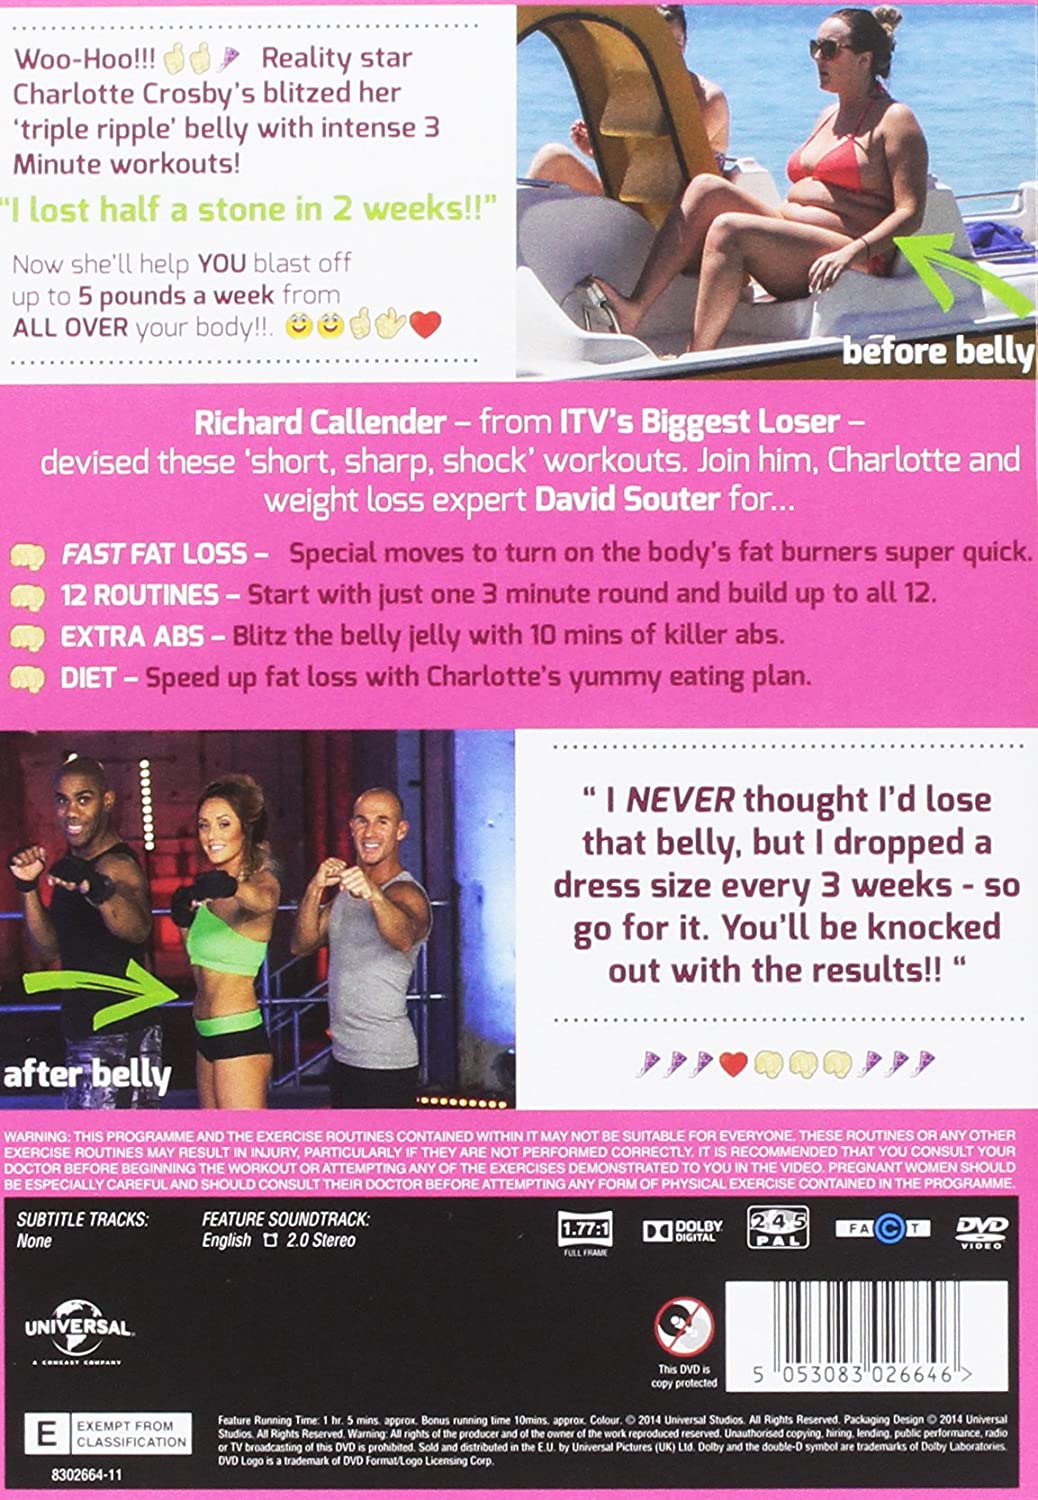 Charlotte Crosby’s 3 Minute Belly Blitz [DVD] [2014]